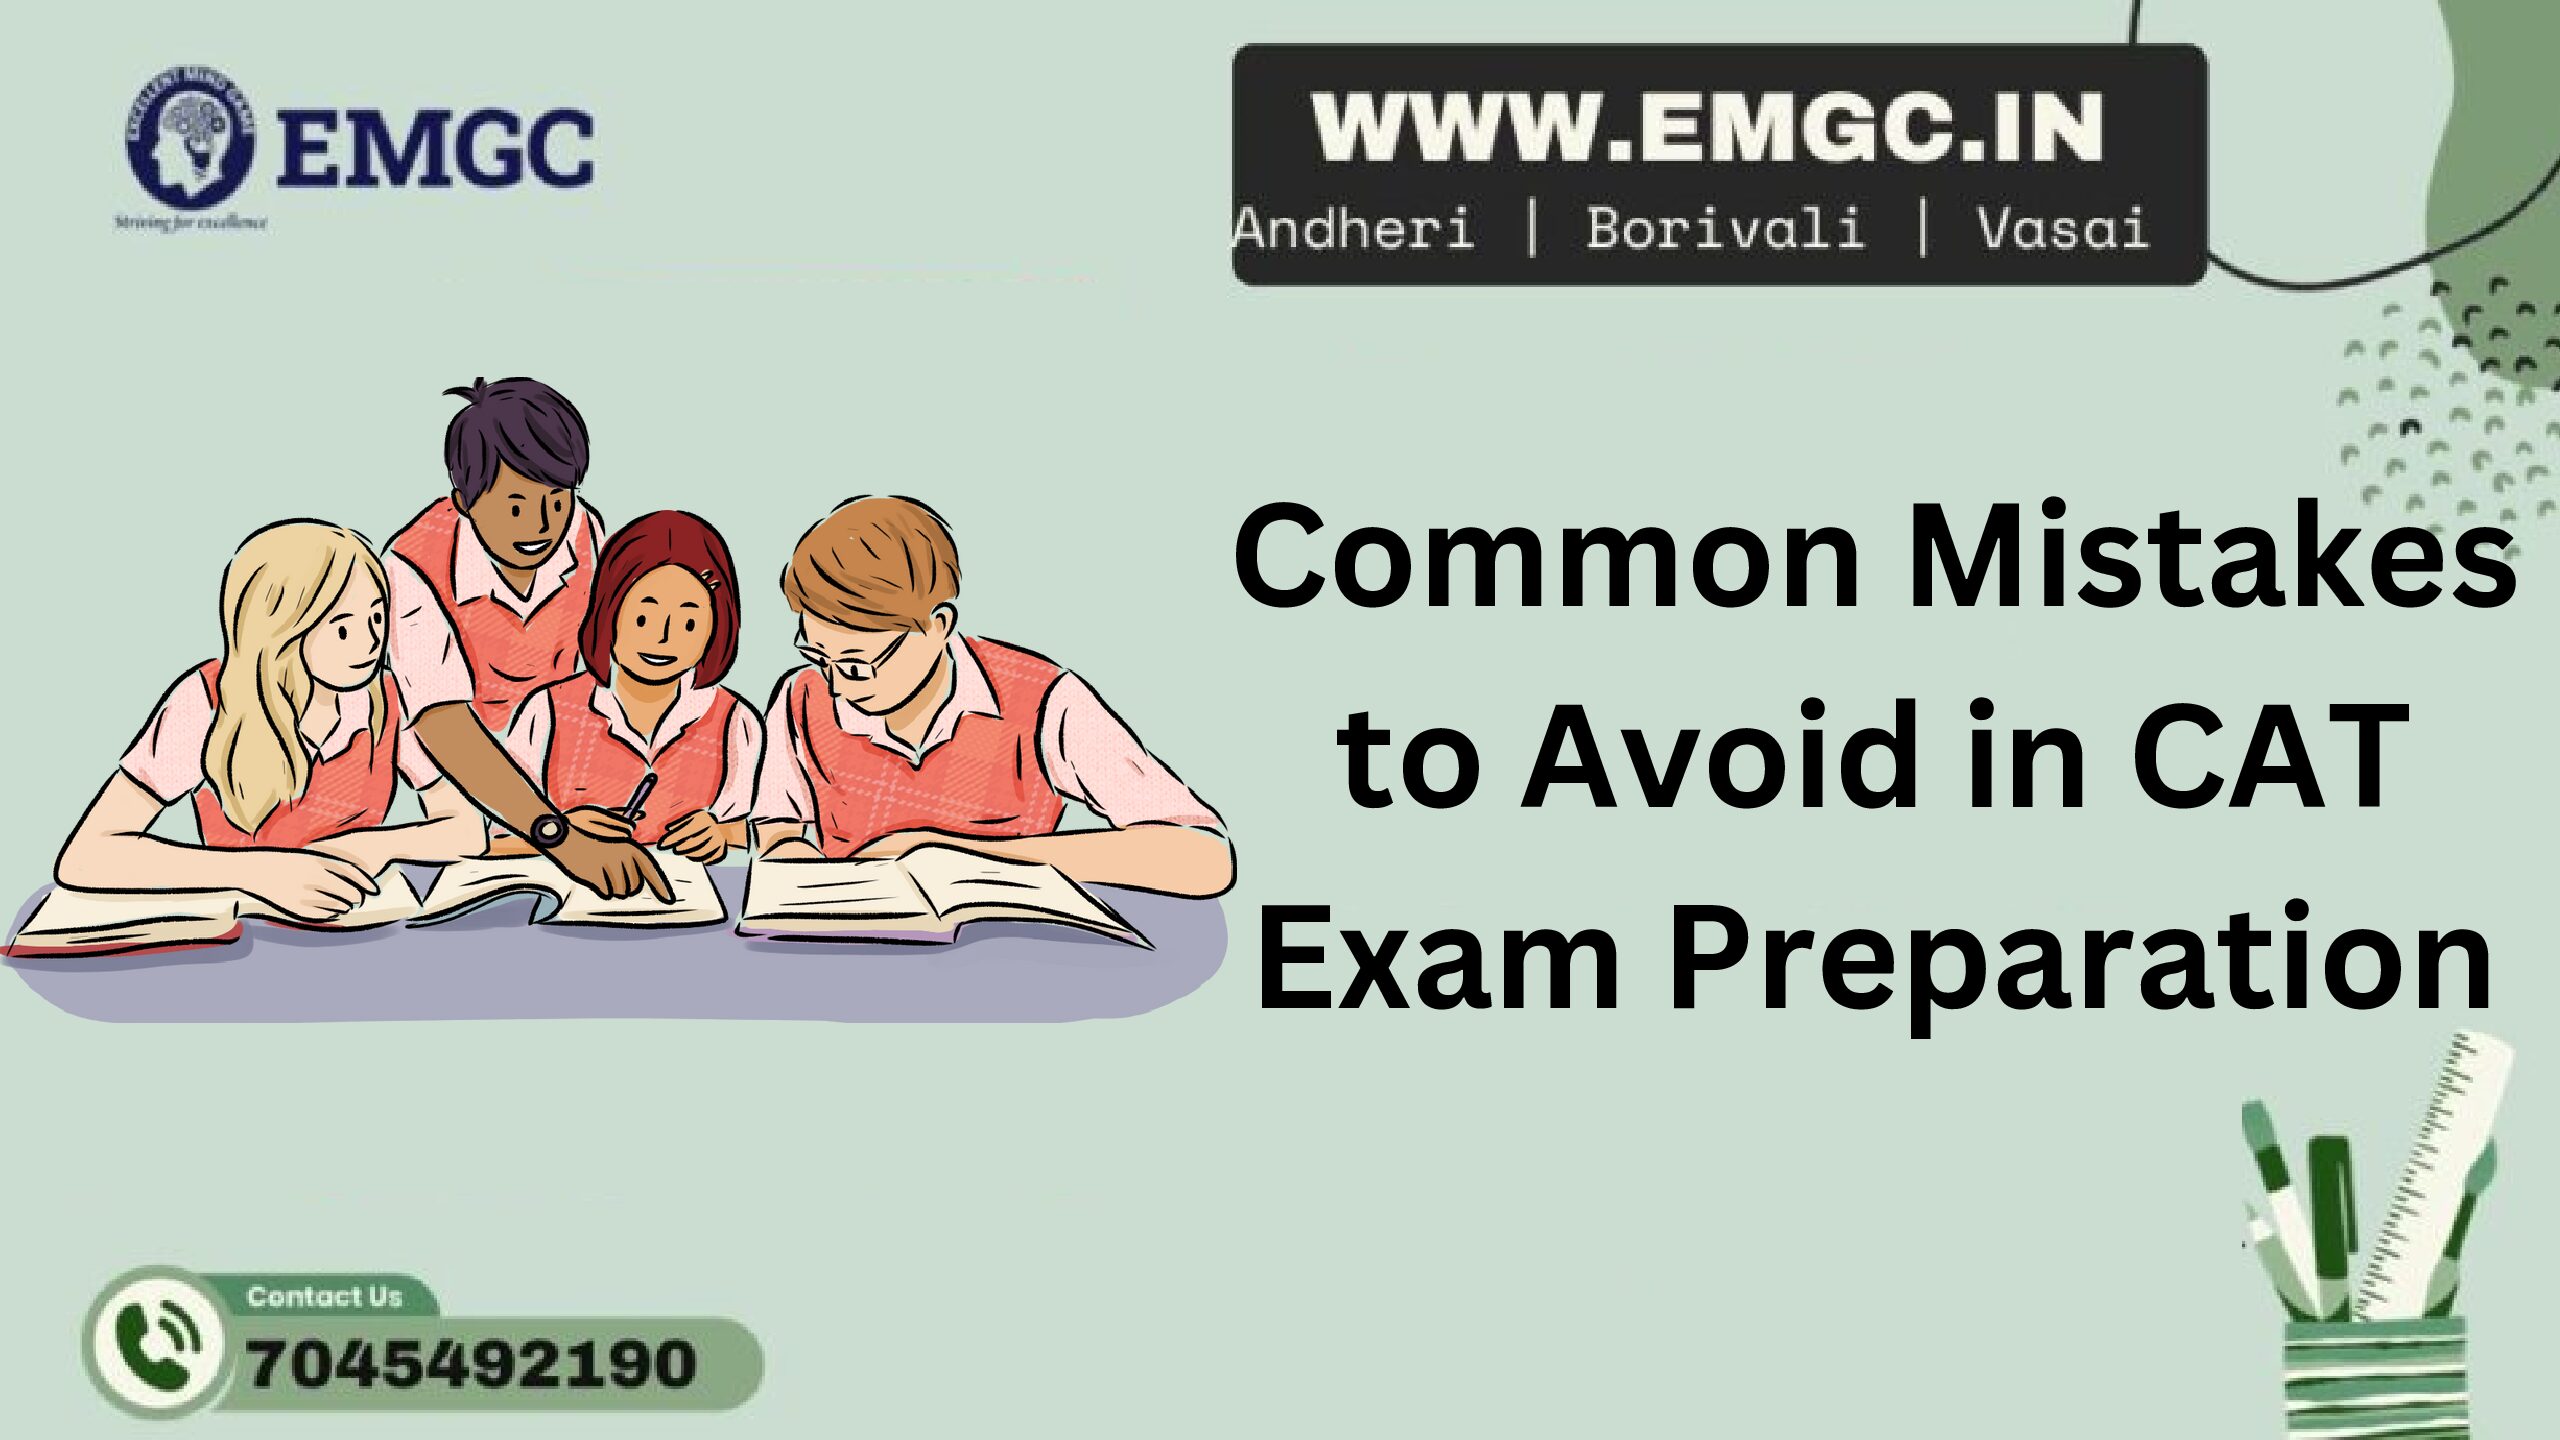 Common Mistakes to Avoid in CAT Exam Preparation